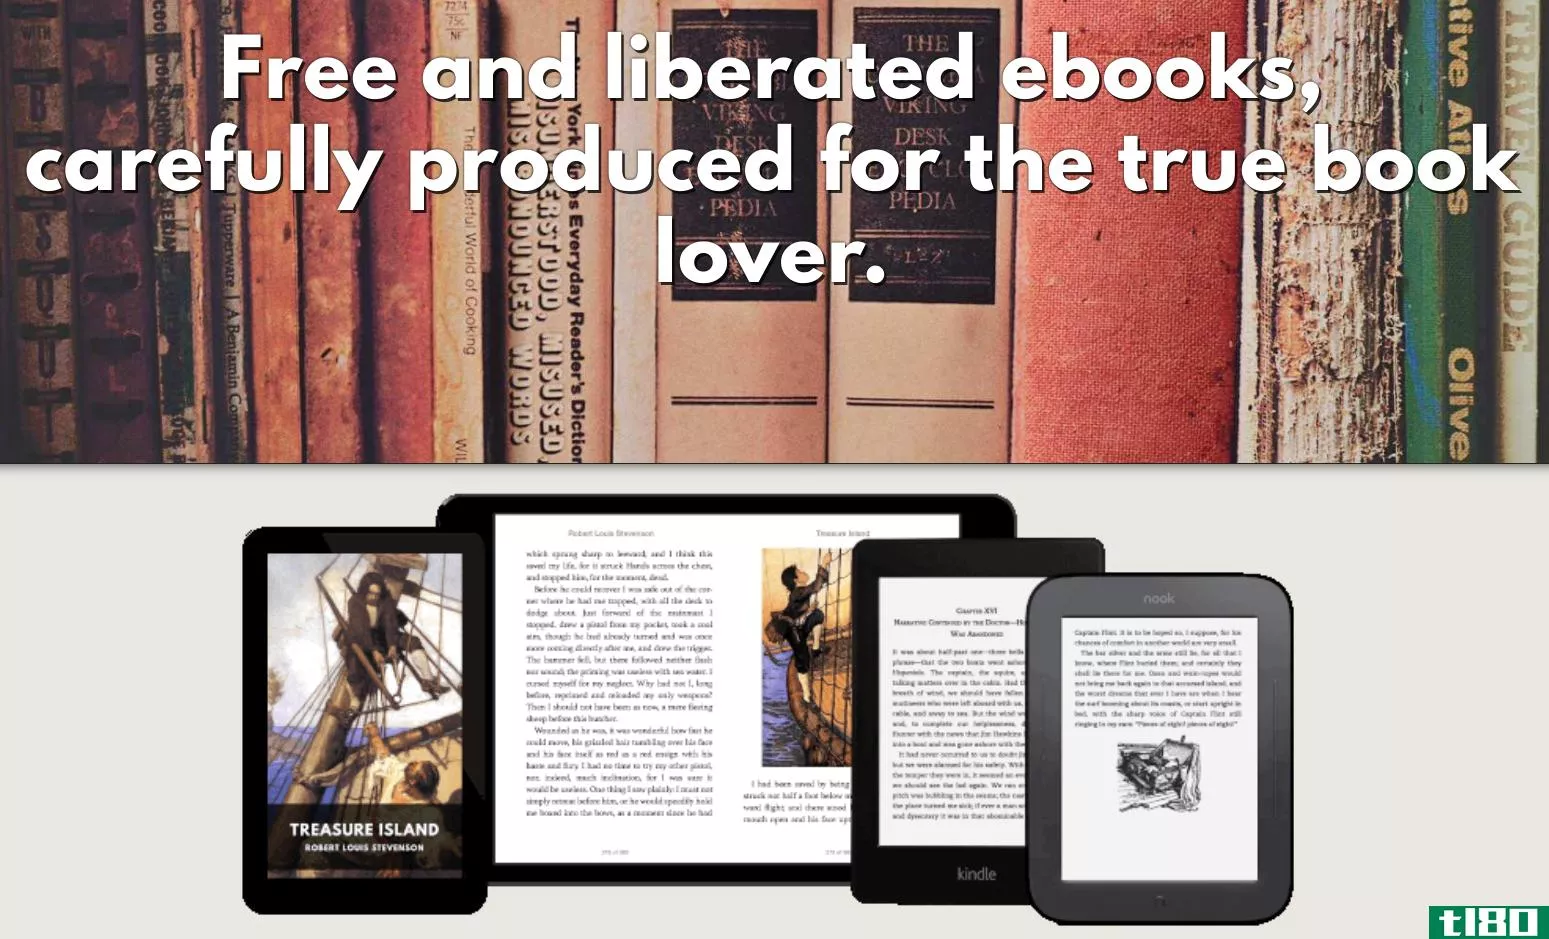 Standard Ebooks reformats classic books to make them easier to read on modern devices